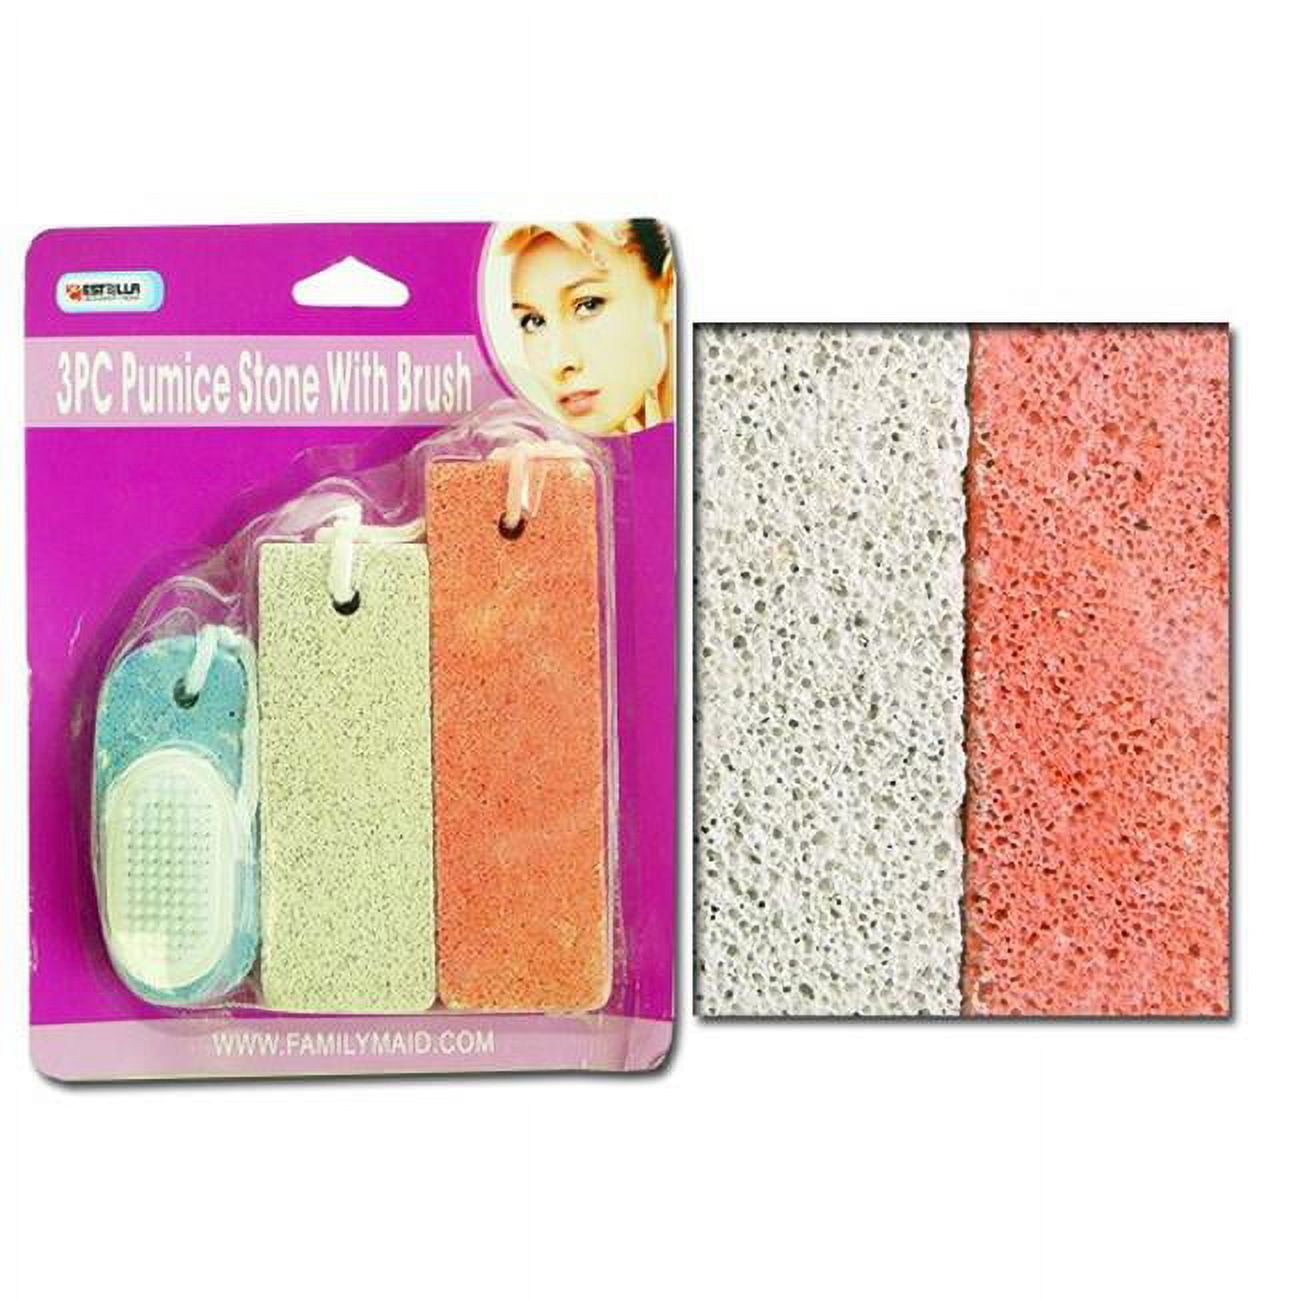 Picture of Familymaid 23179 Pumice Stone with Brush, 3 Piece per Set - Pack of 72